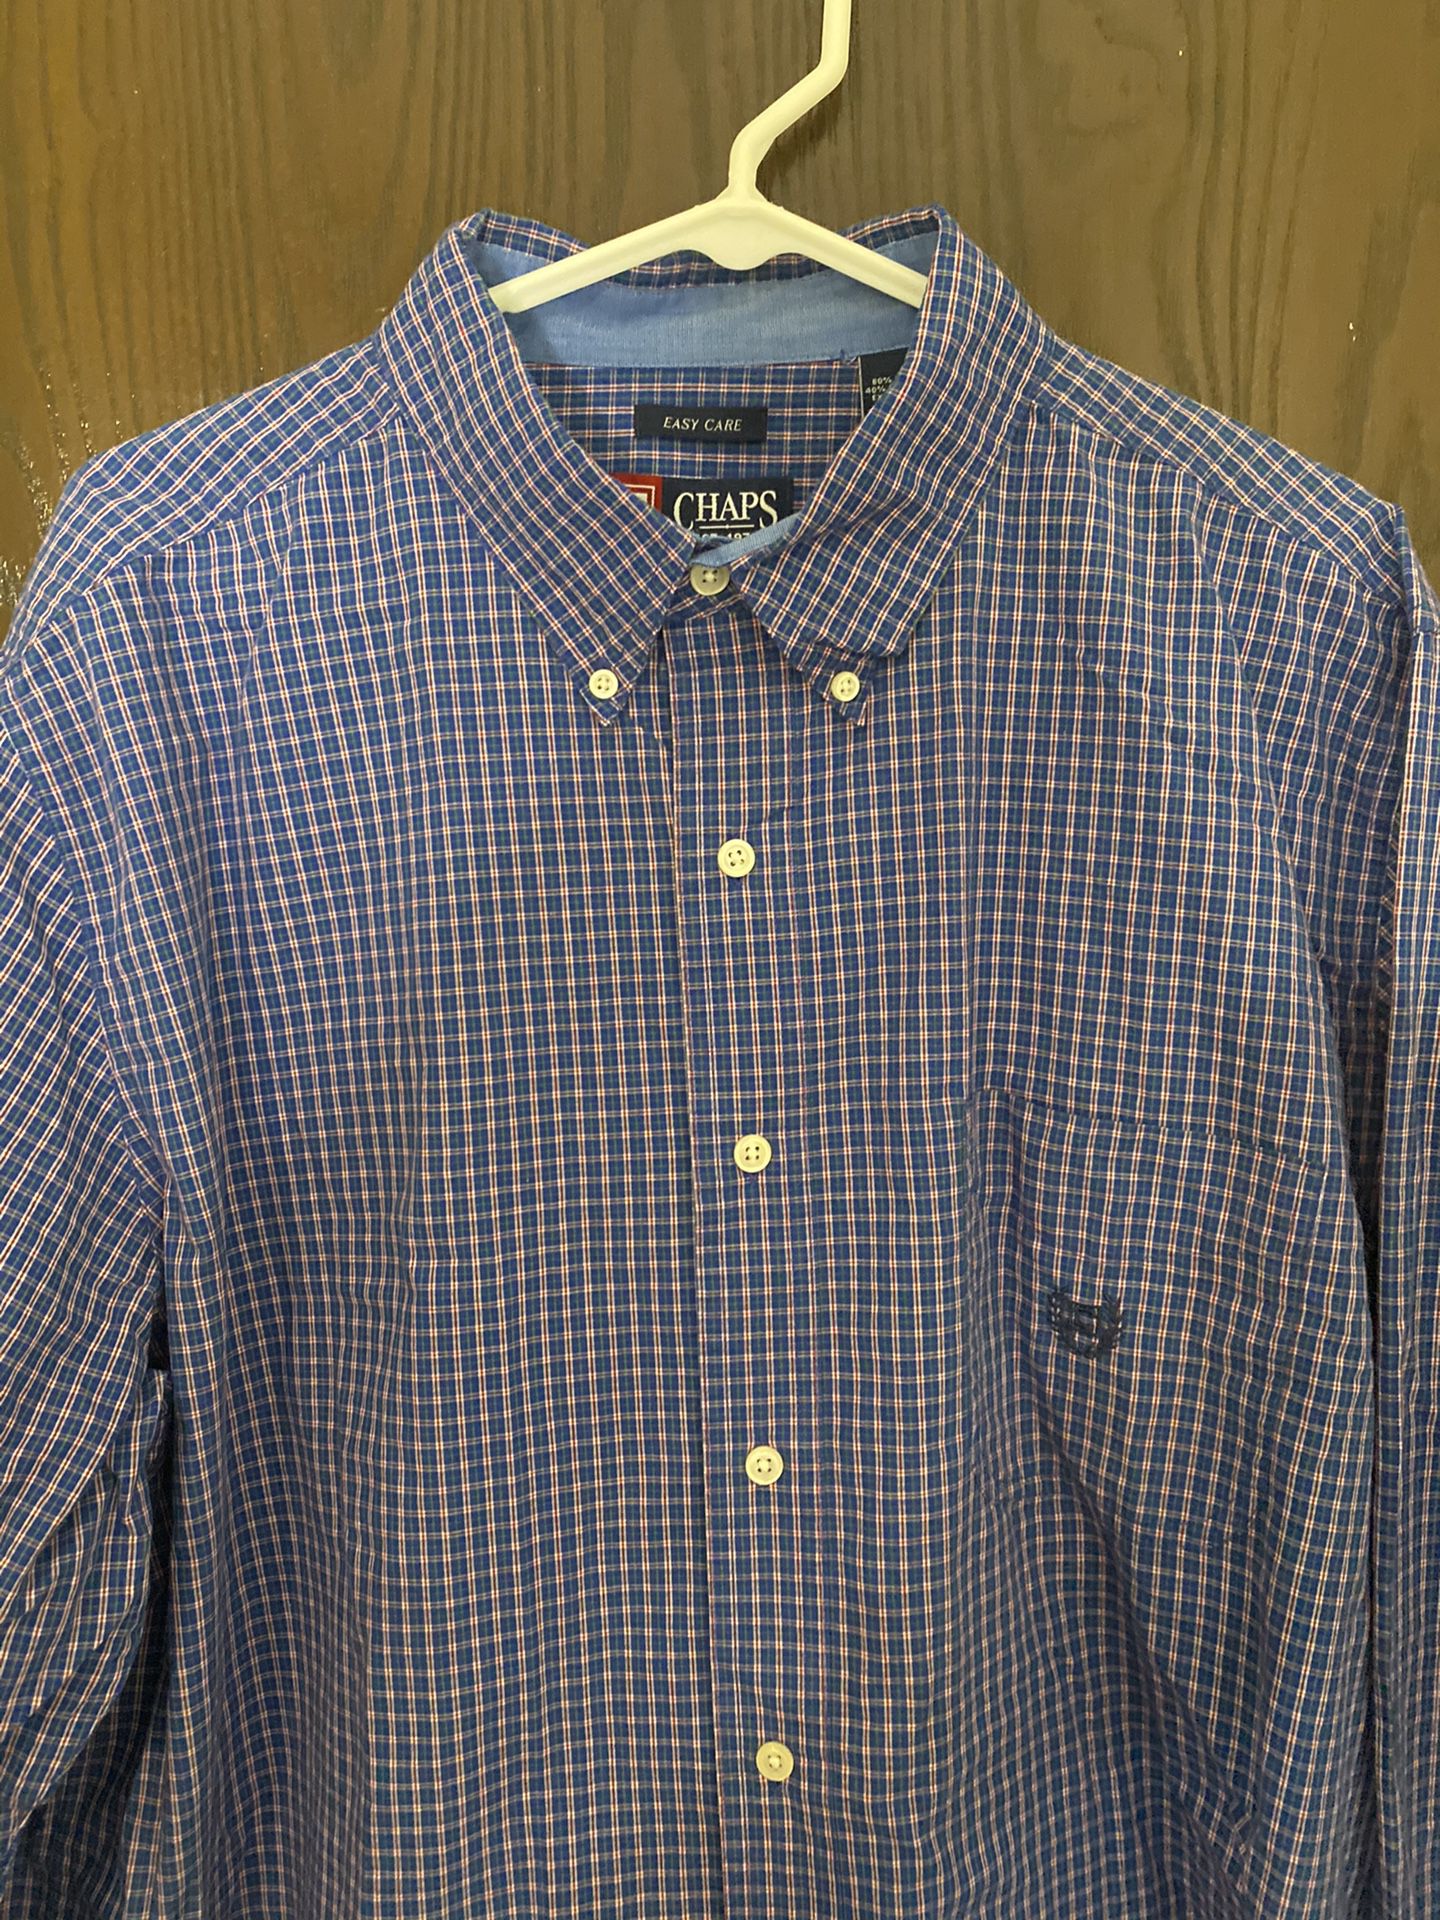 Chaps Easy Care Checkered Long Sleeve Blue Button Down Men's Size XL XLarge